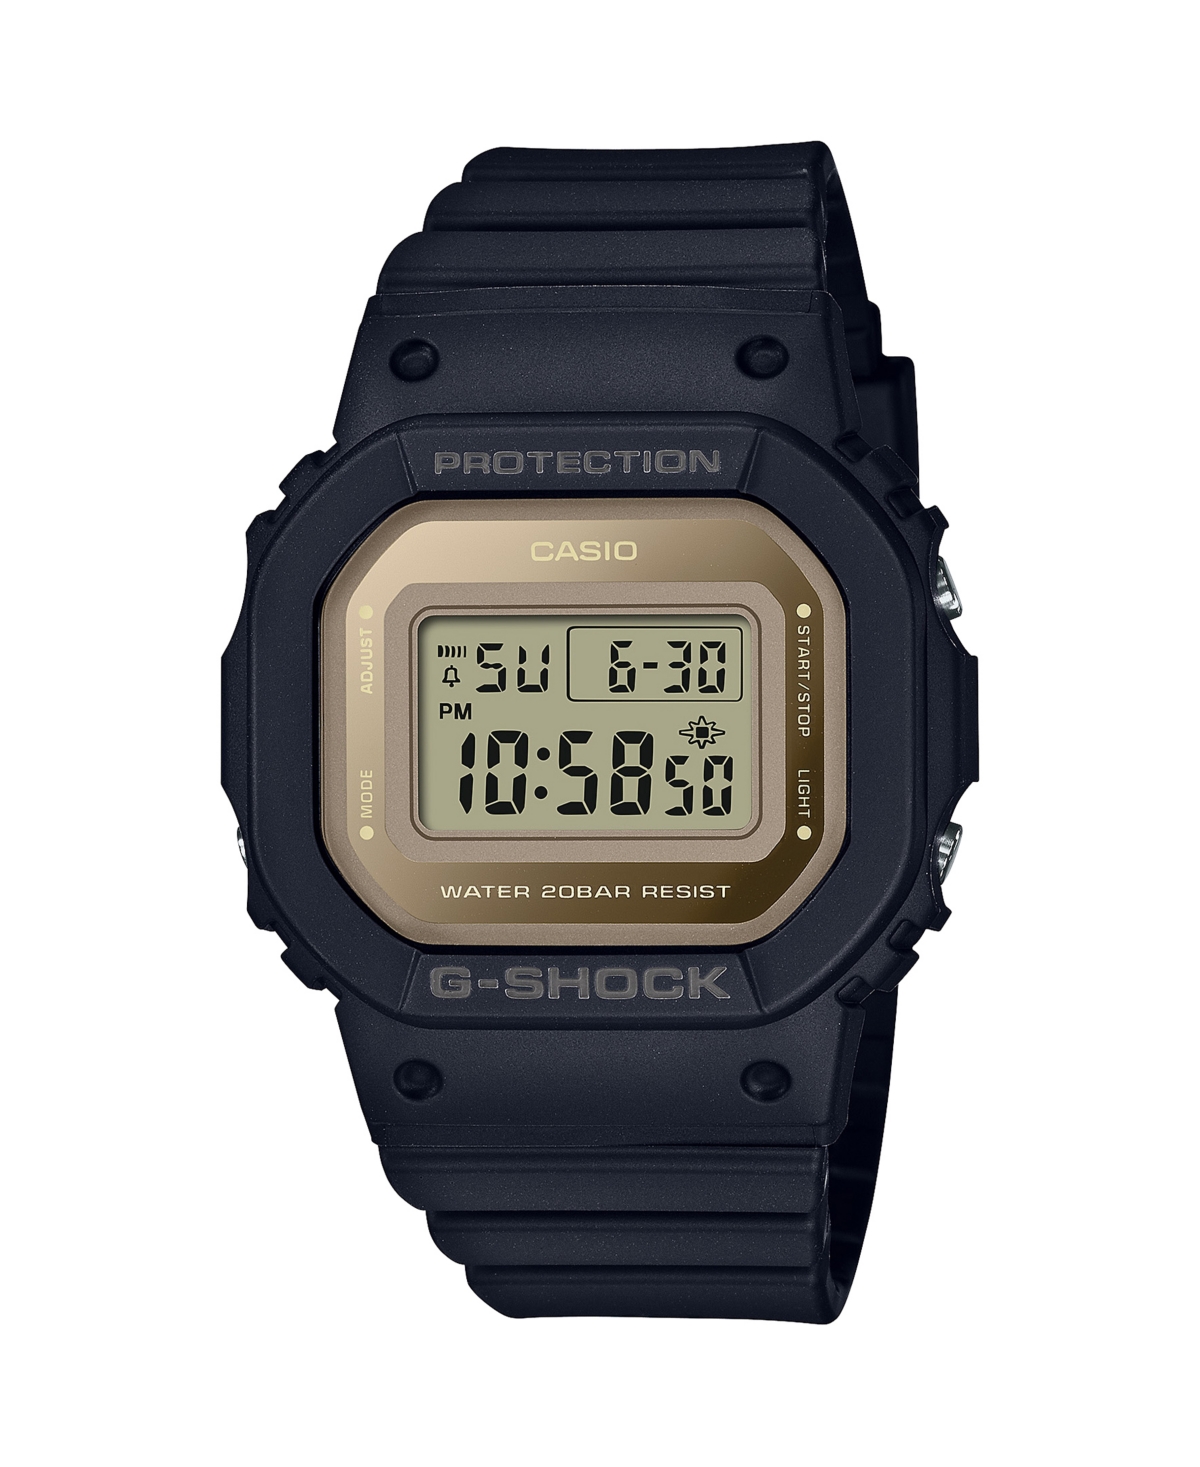 G-shock Unisex Black And Gold-tone Resin Digital Watch 40.5mm, Gmds5600-1